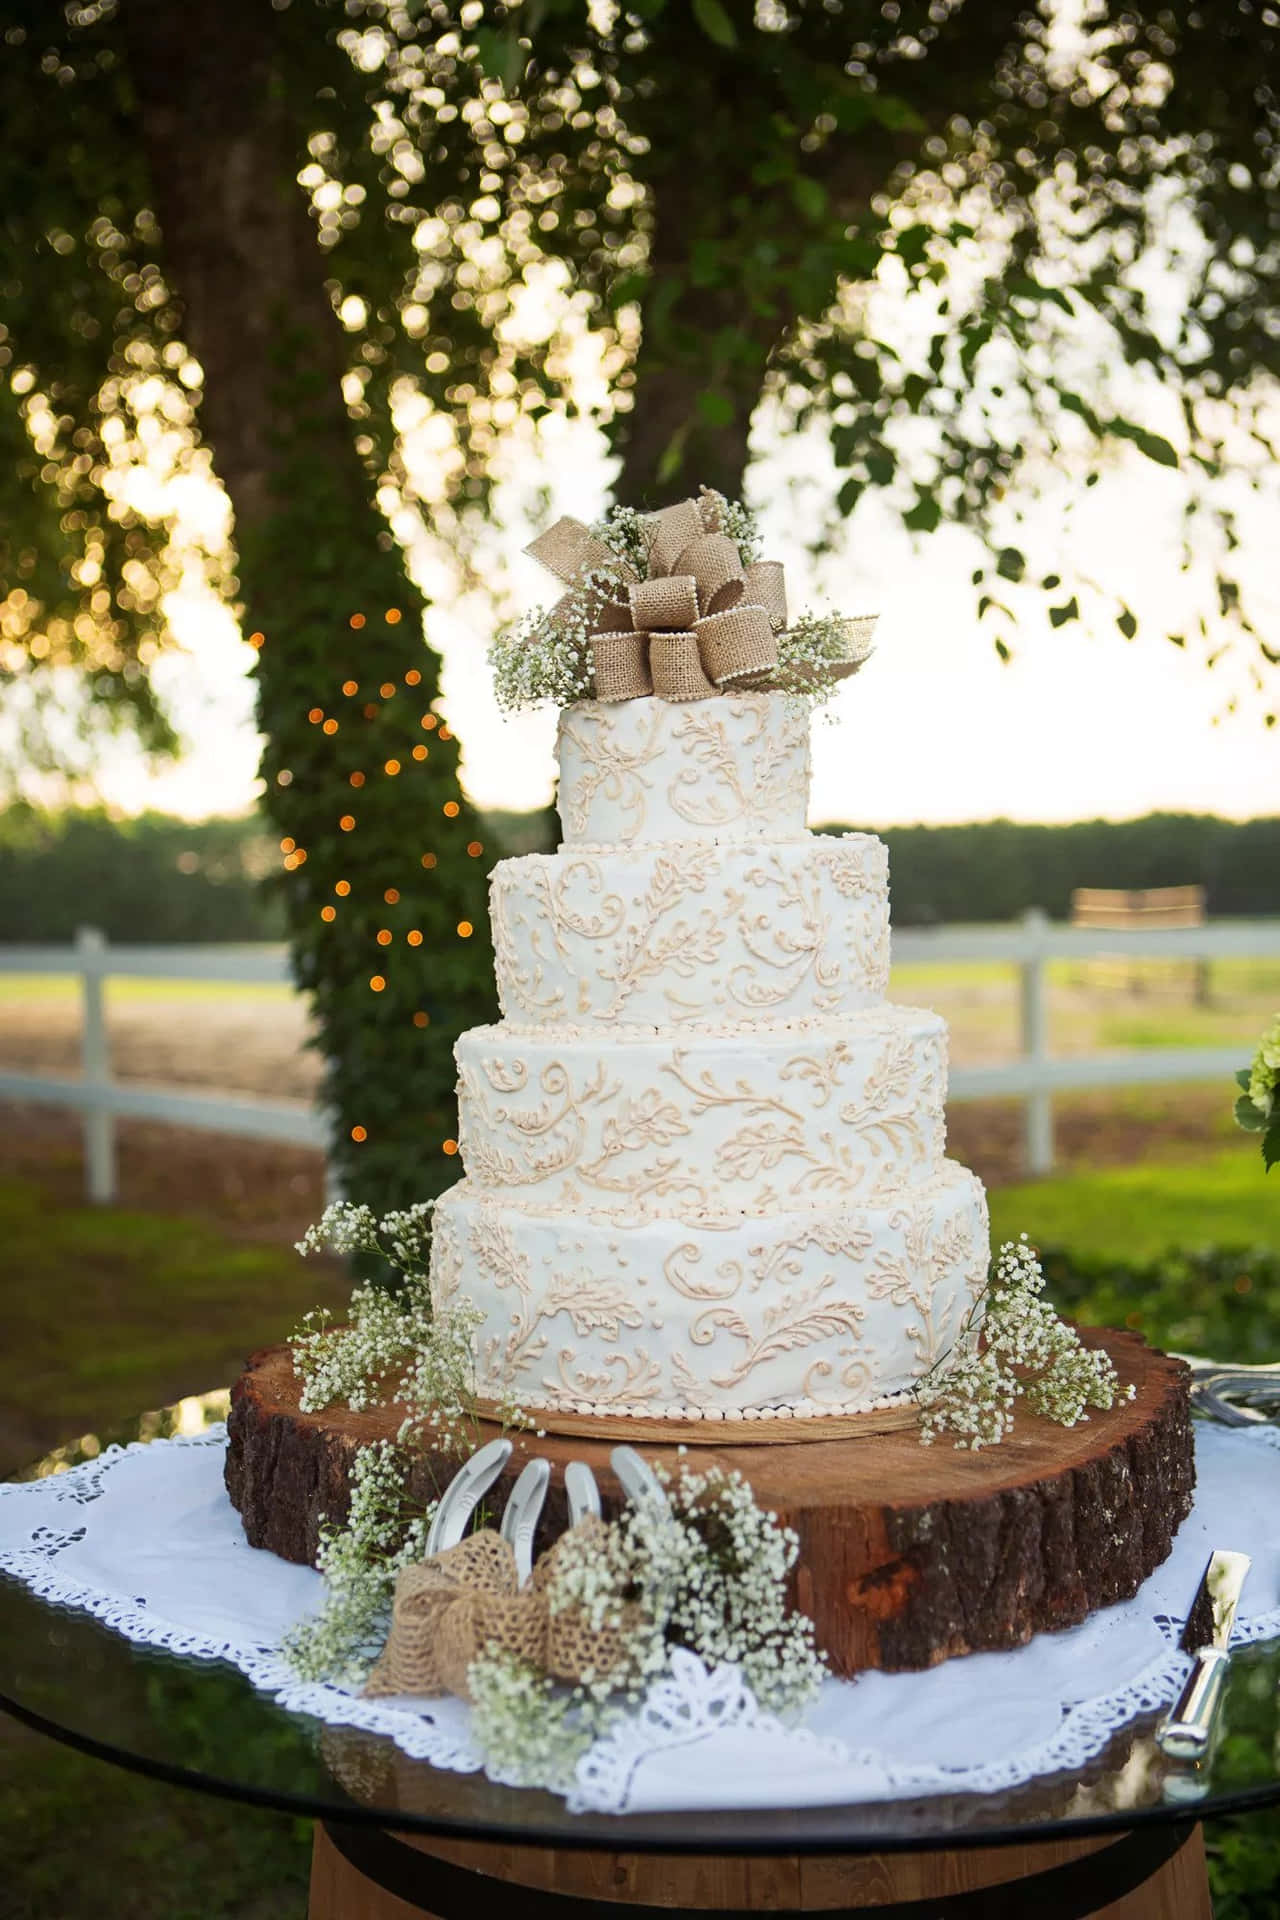 A Wedding Cake On A Wooden Table